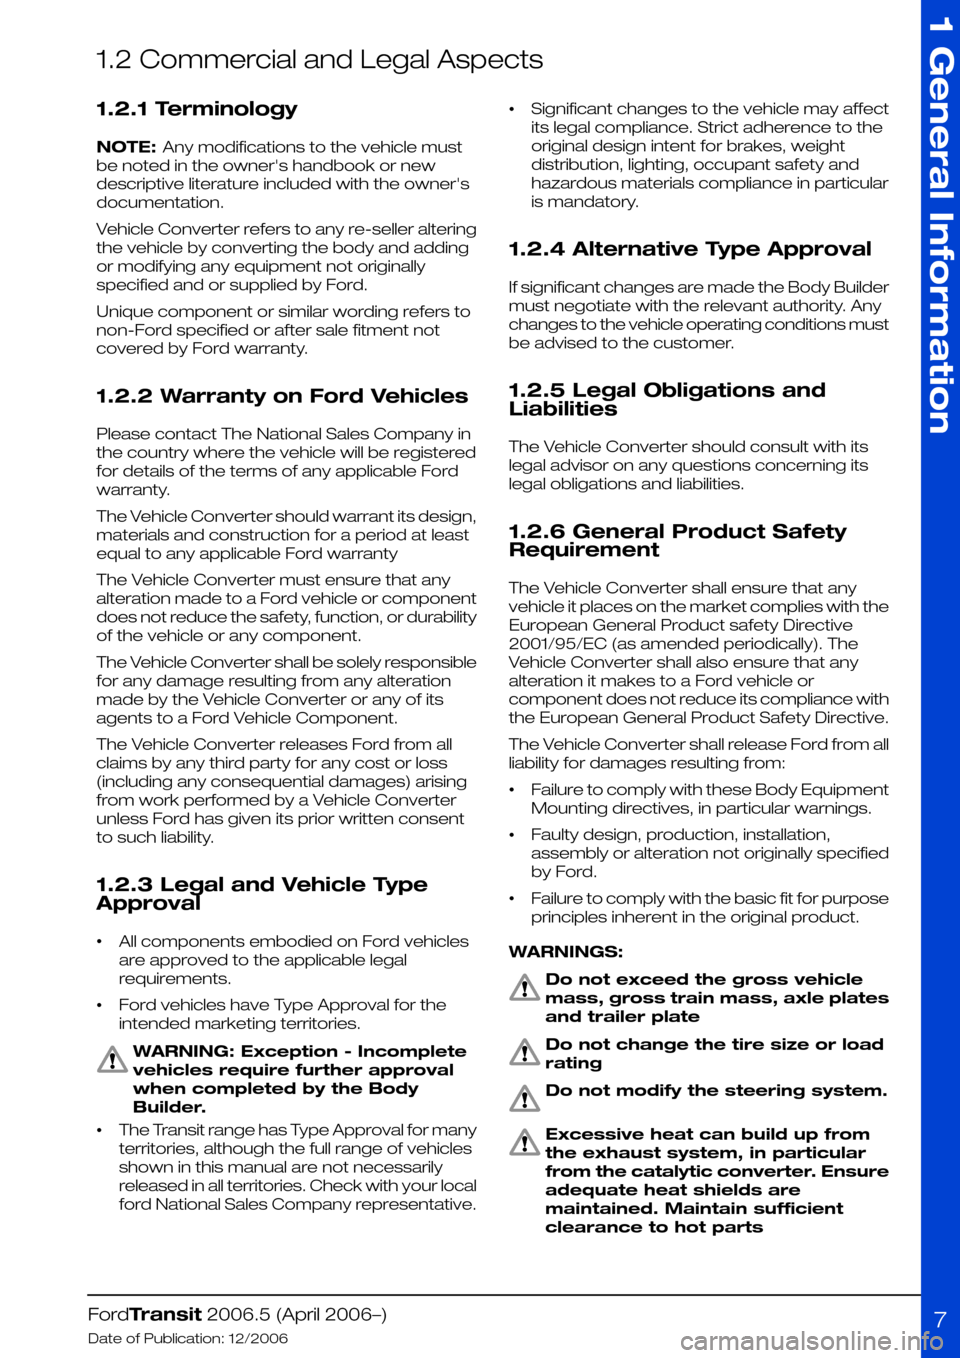 FORD TRANSIT 2006 7.G Body And Equipment Mounting Section Manual 1.2 Commercial and Legal Aspects
1.2.1 Terminology
NOTE: Any modifications to the vehicle must
be noted in the owners handbook or new
descriptive literature included with the owners
documentation.
V